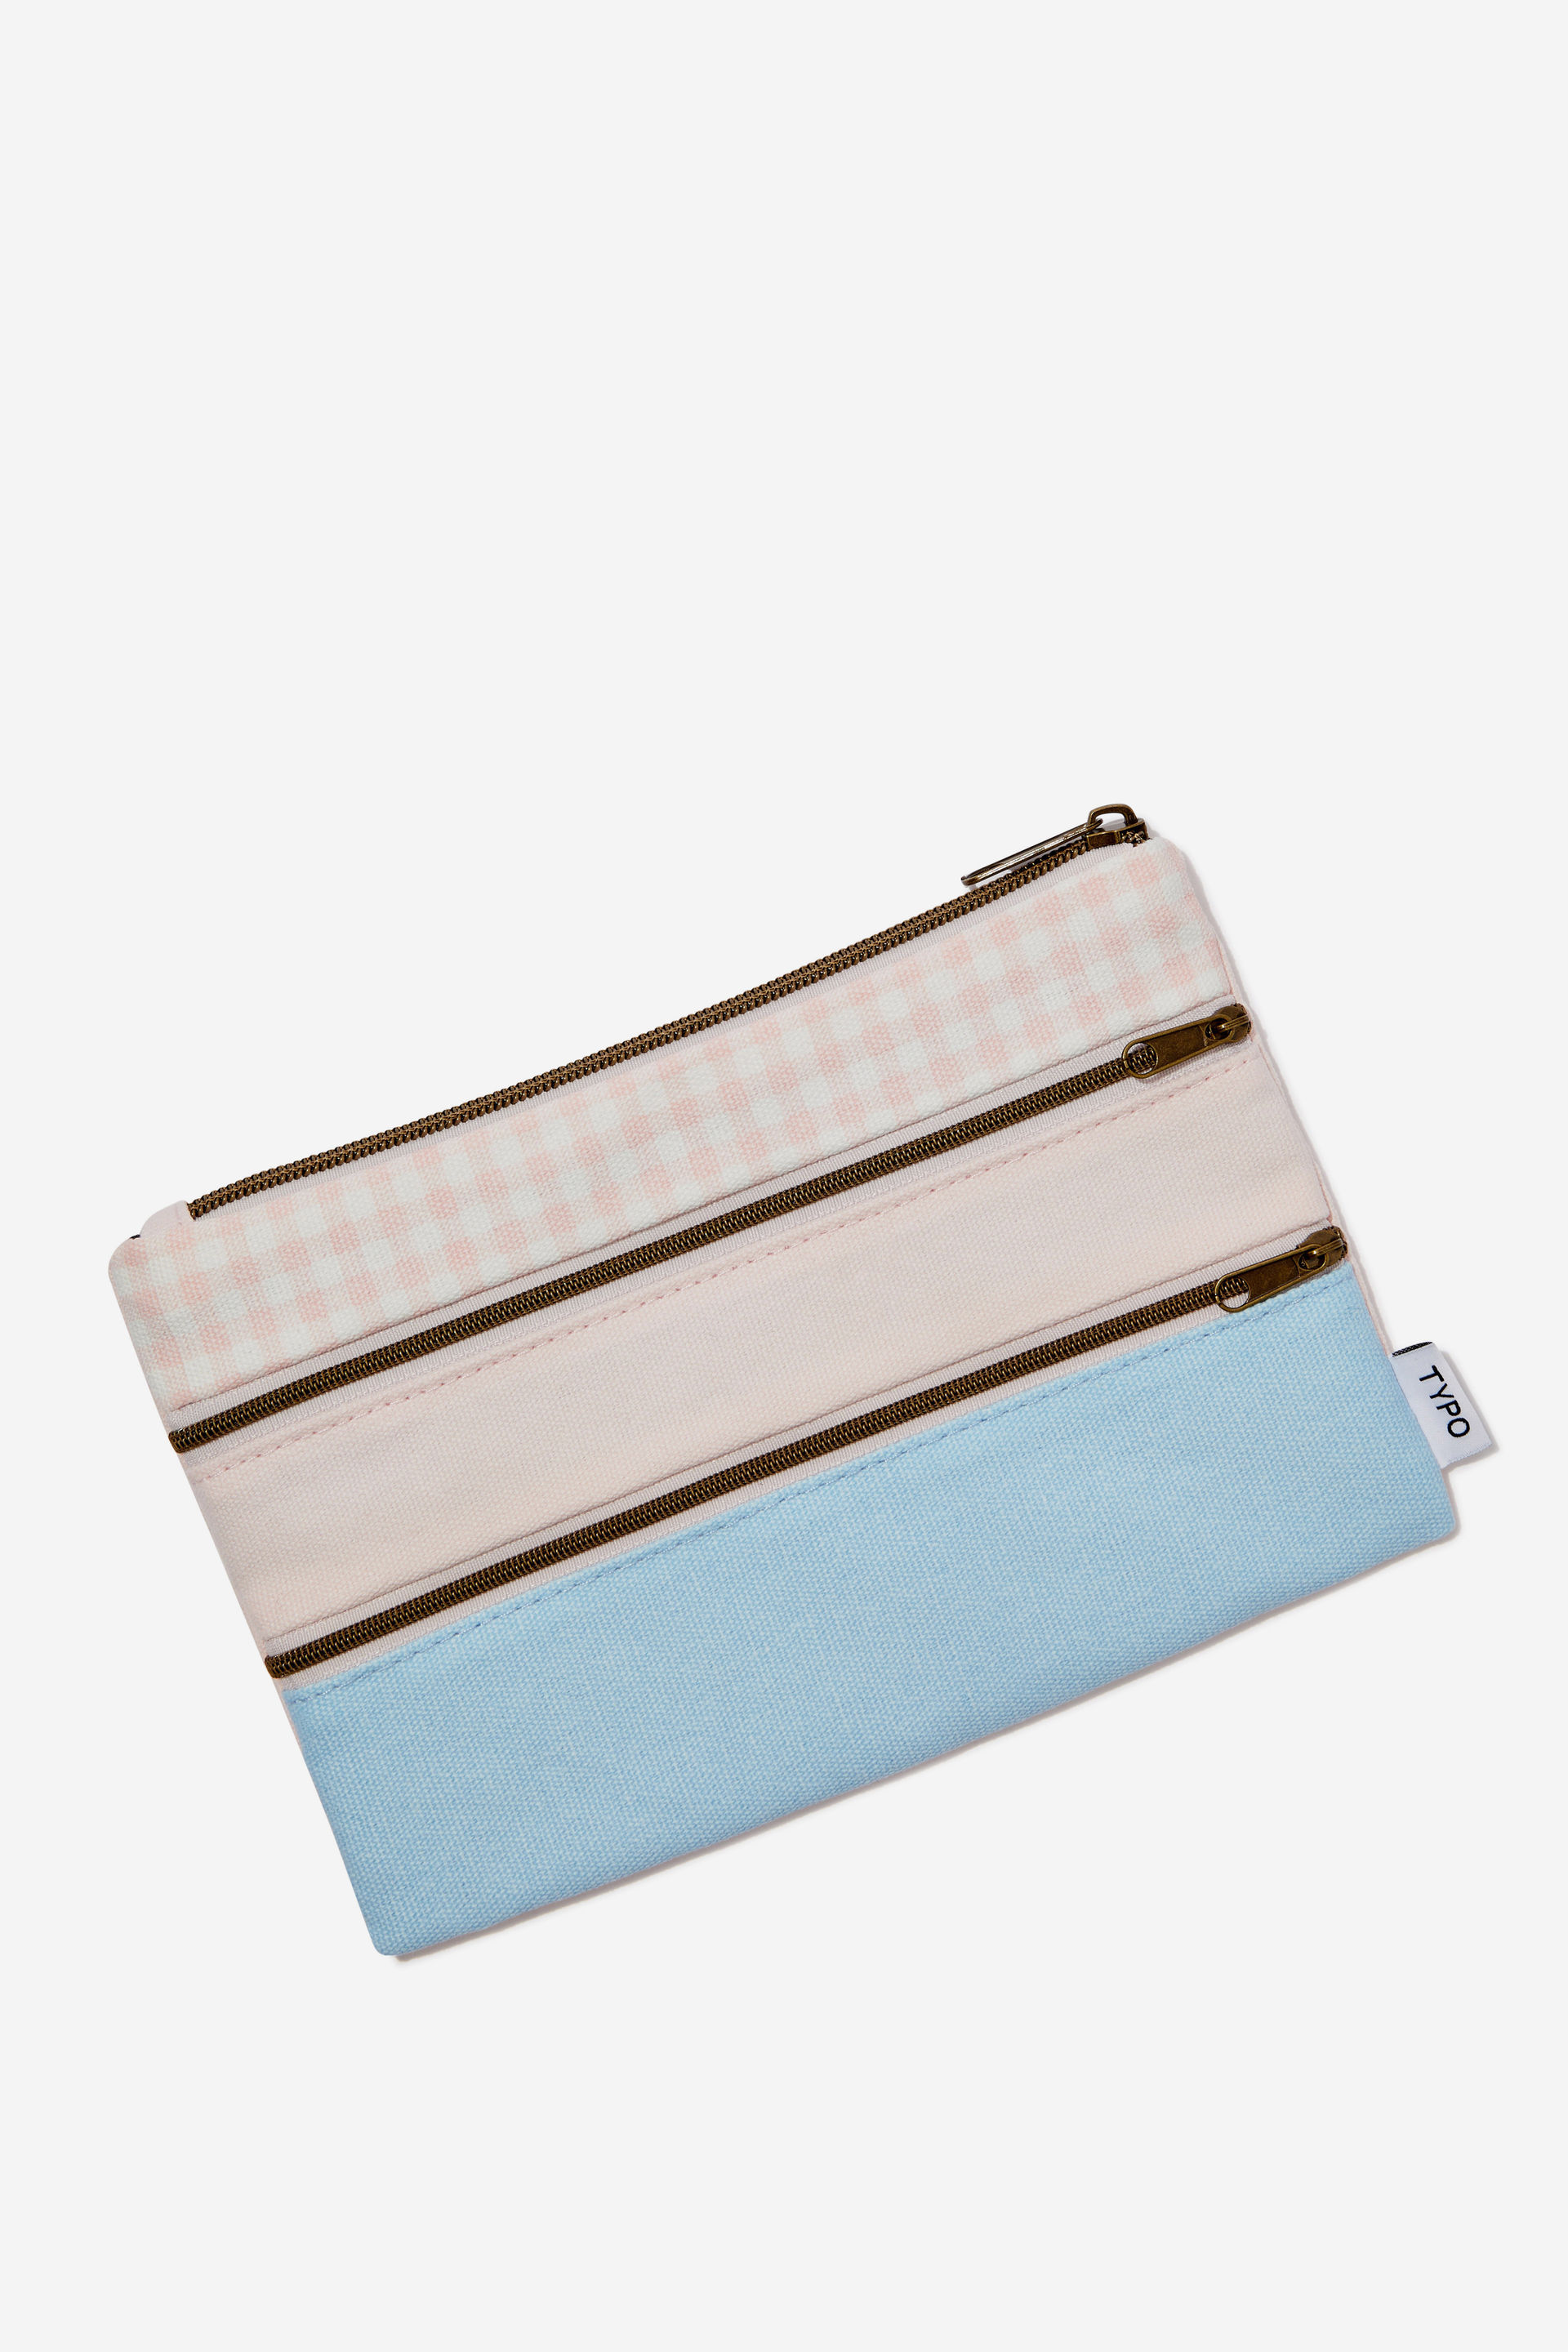 Typo - Double Campus Pencil Case - Gingham pink blue splice